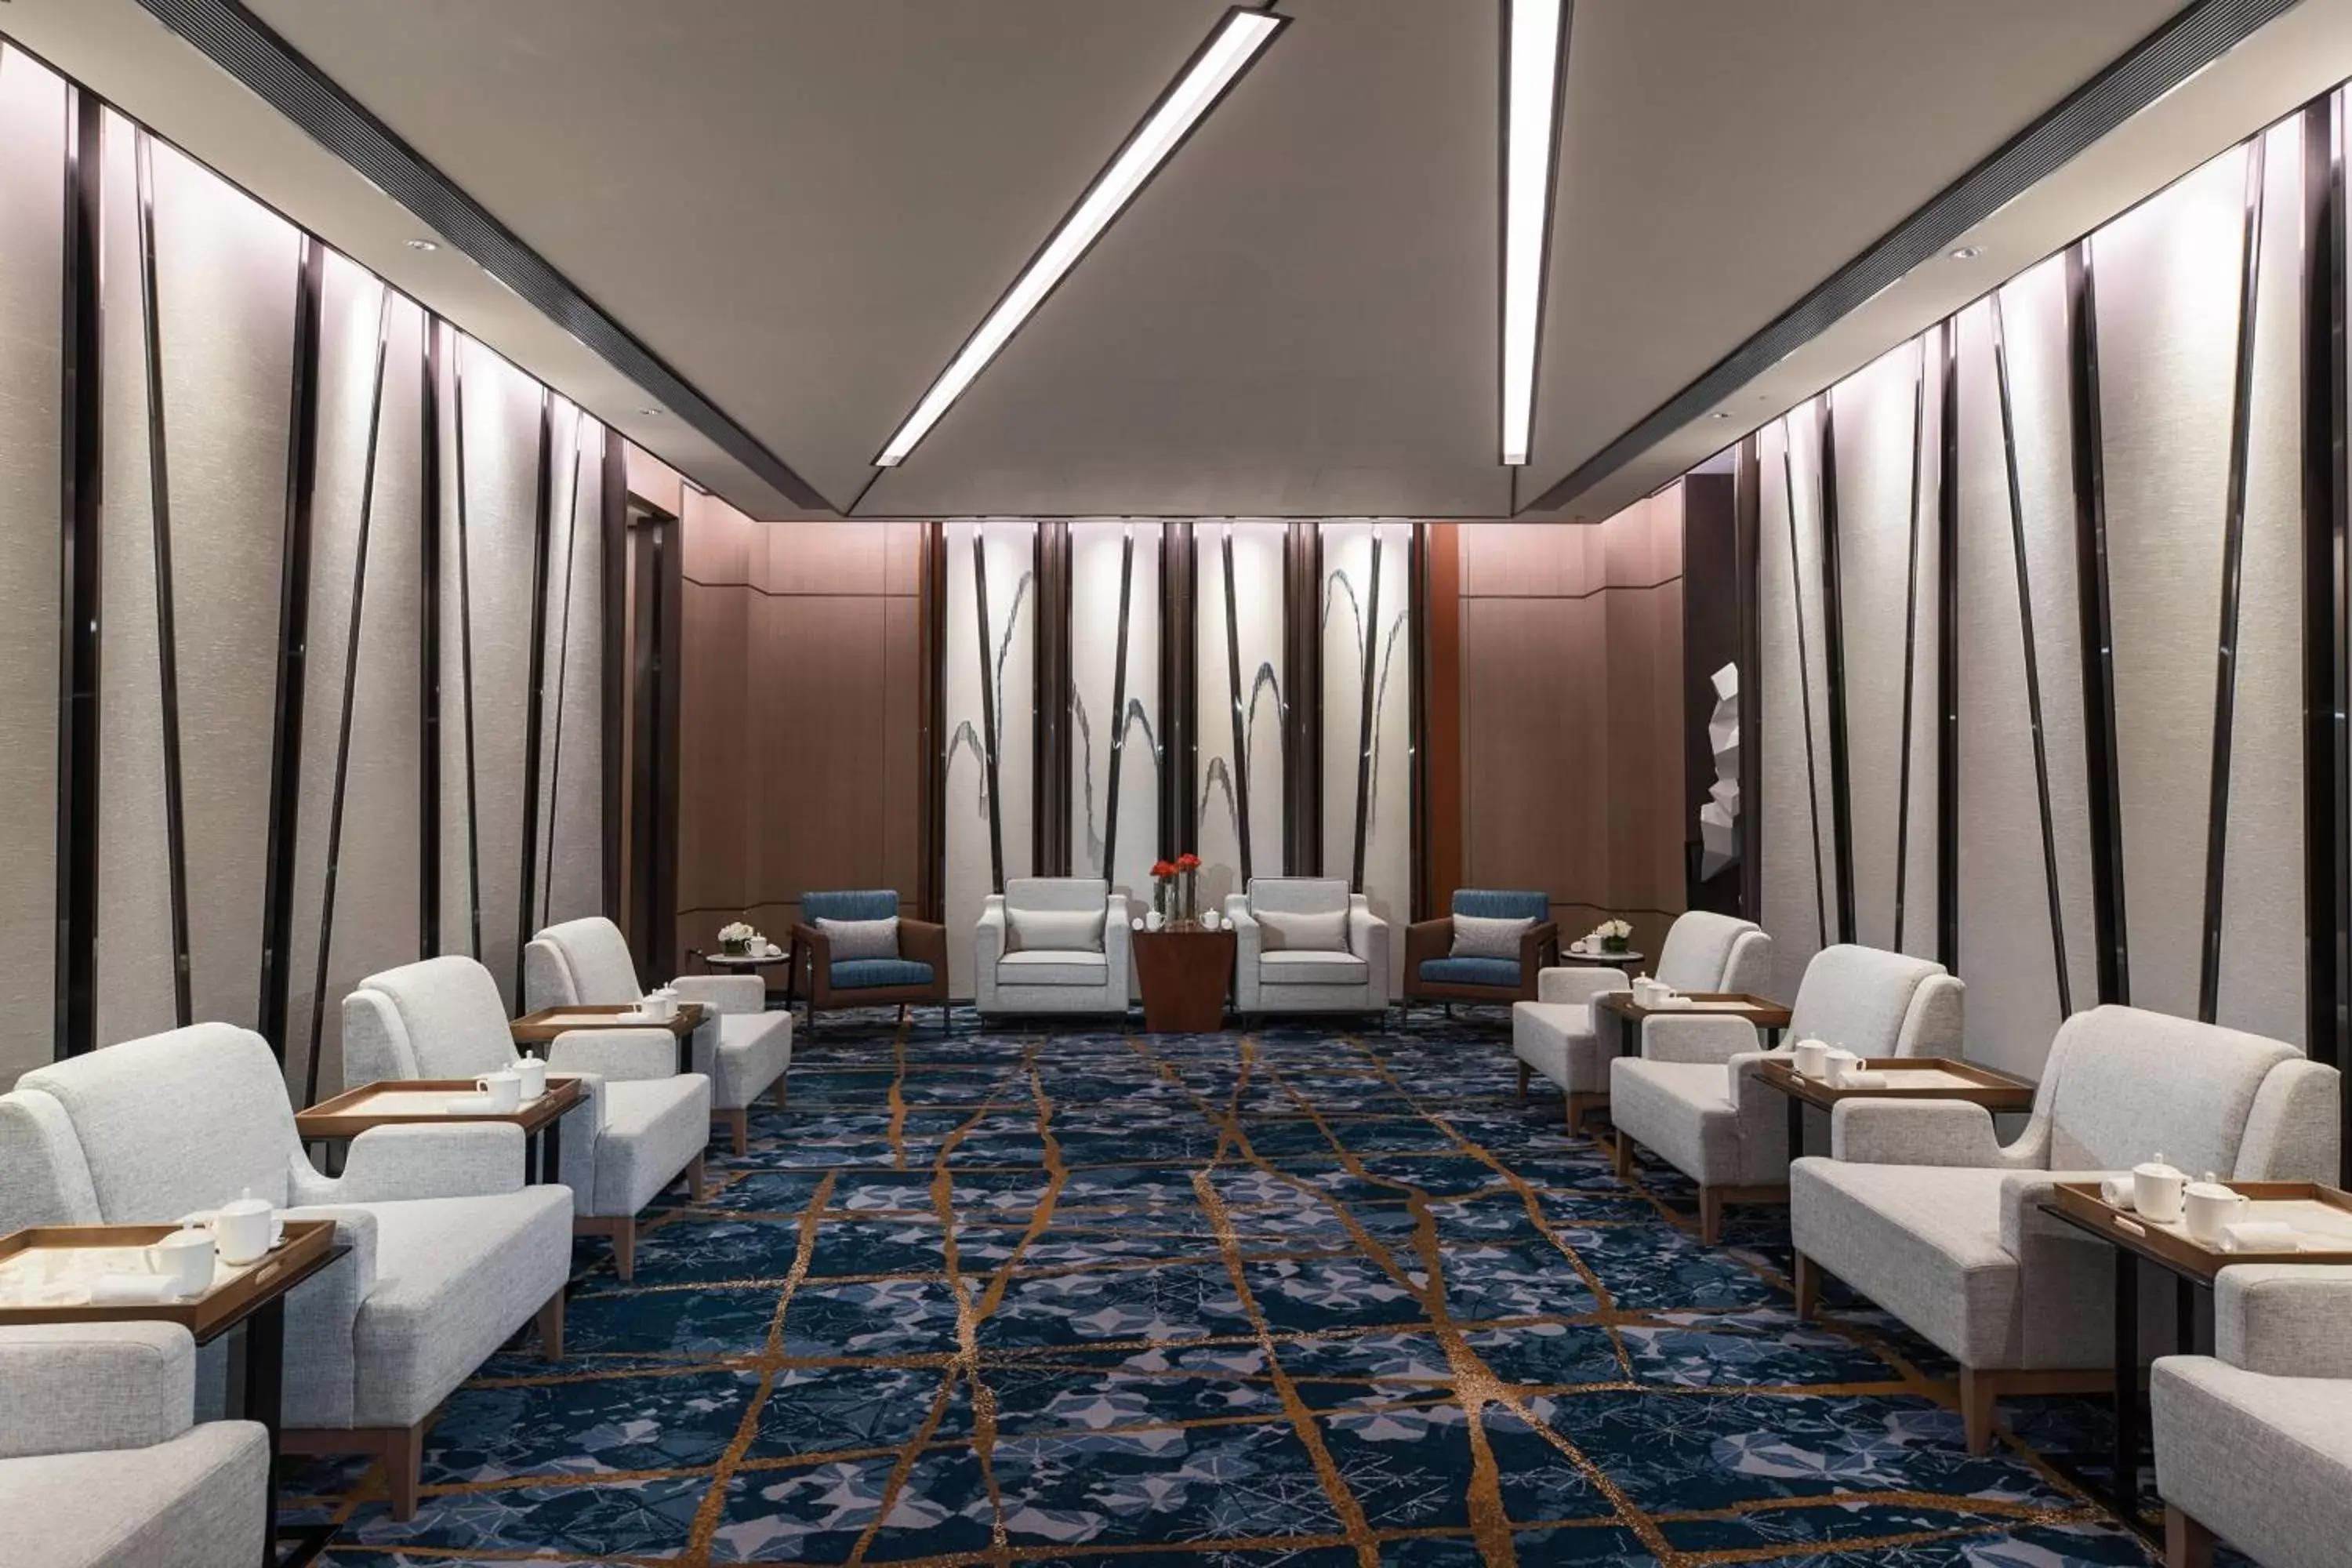 Meeting/conference room, Banquet Facilities in Renaissance Xi'an Hotel